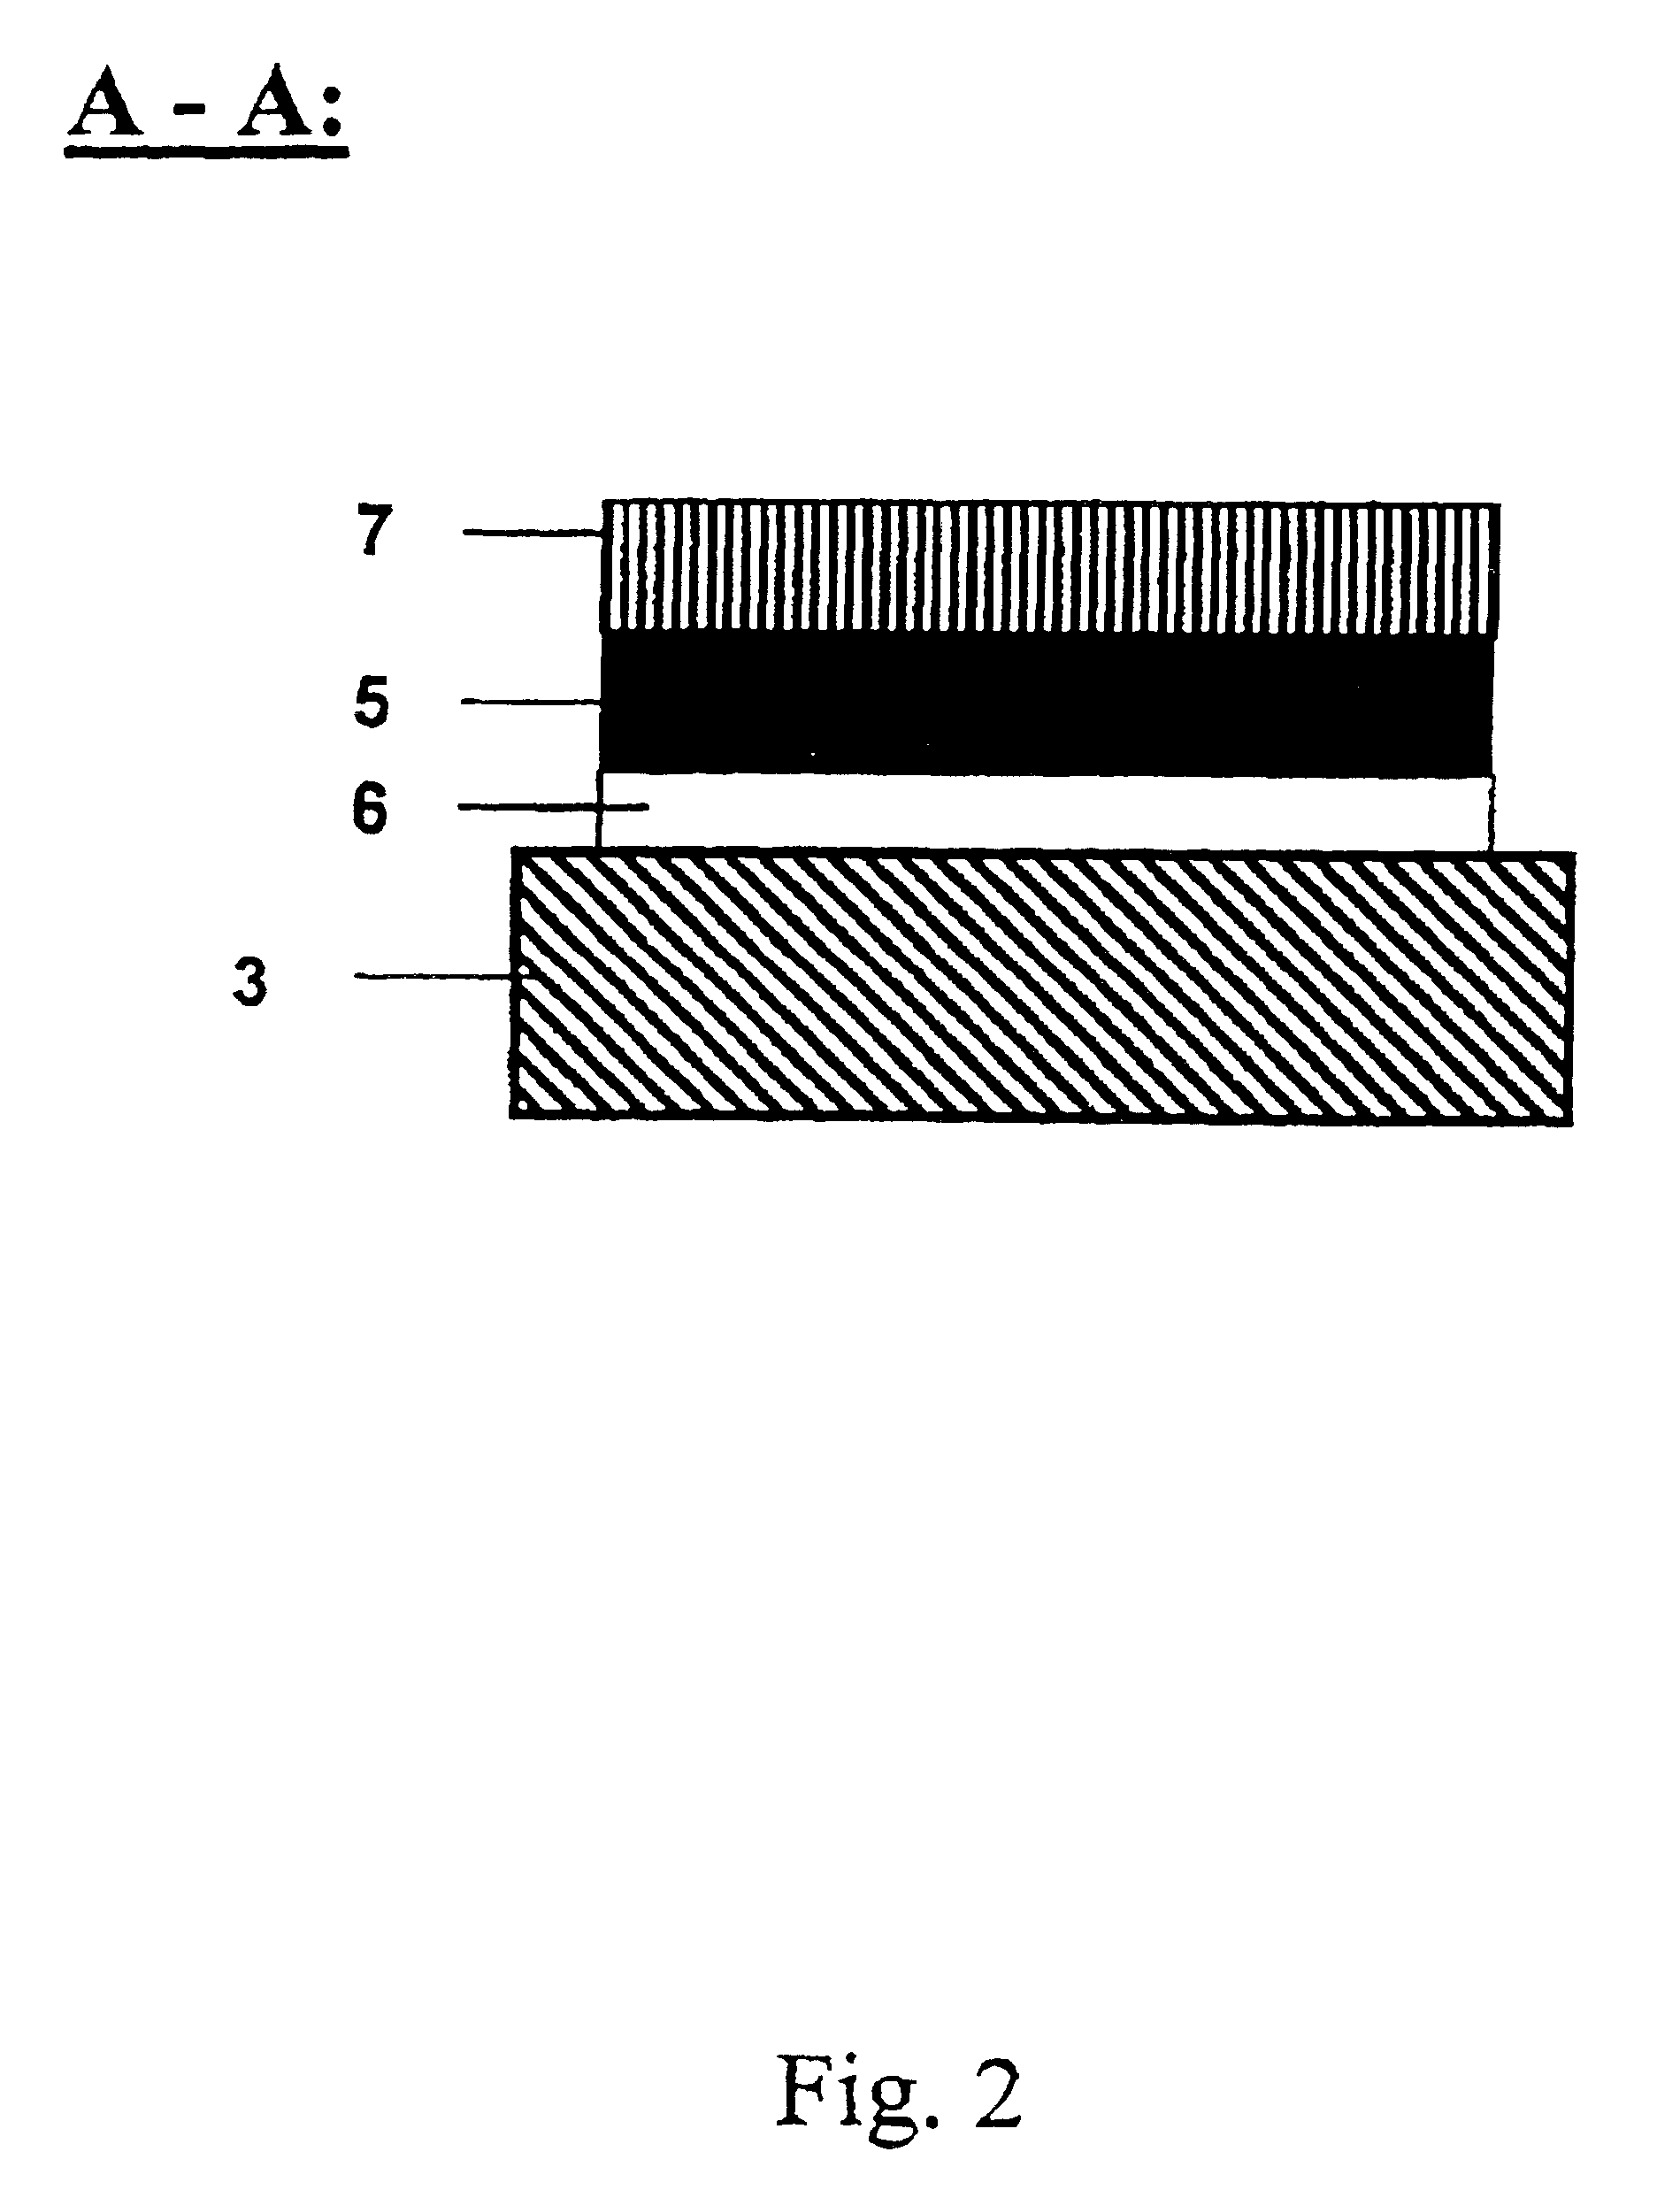 Non-specific binding resistant protein arrays and methods for making the same